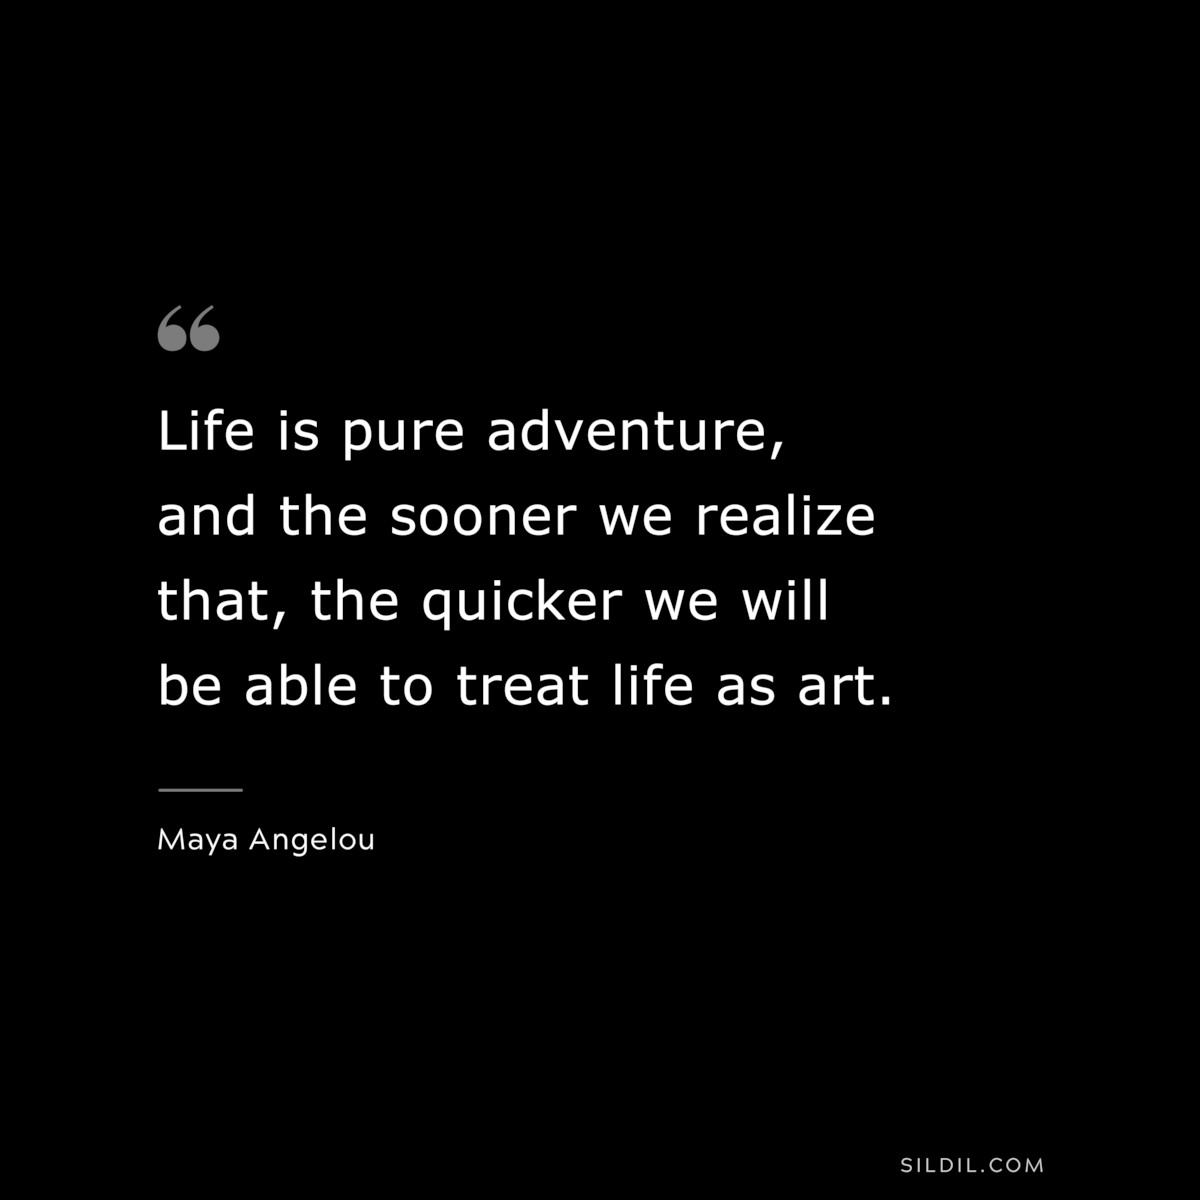 Life is pure adventure, and the sooner we realize that, the quicker we will be able to treat life as art. ― Maya Angelou